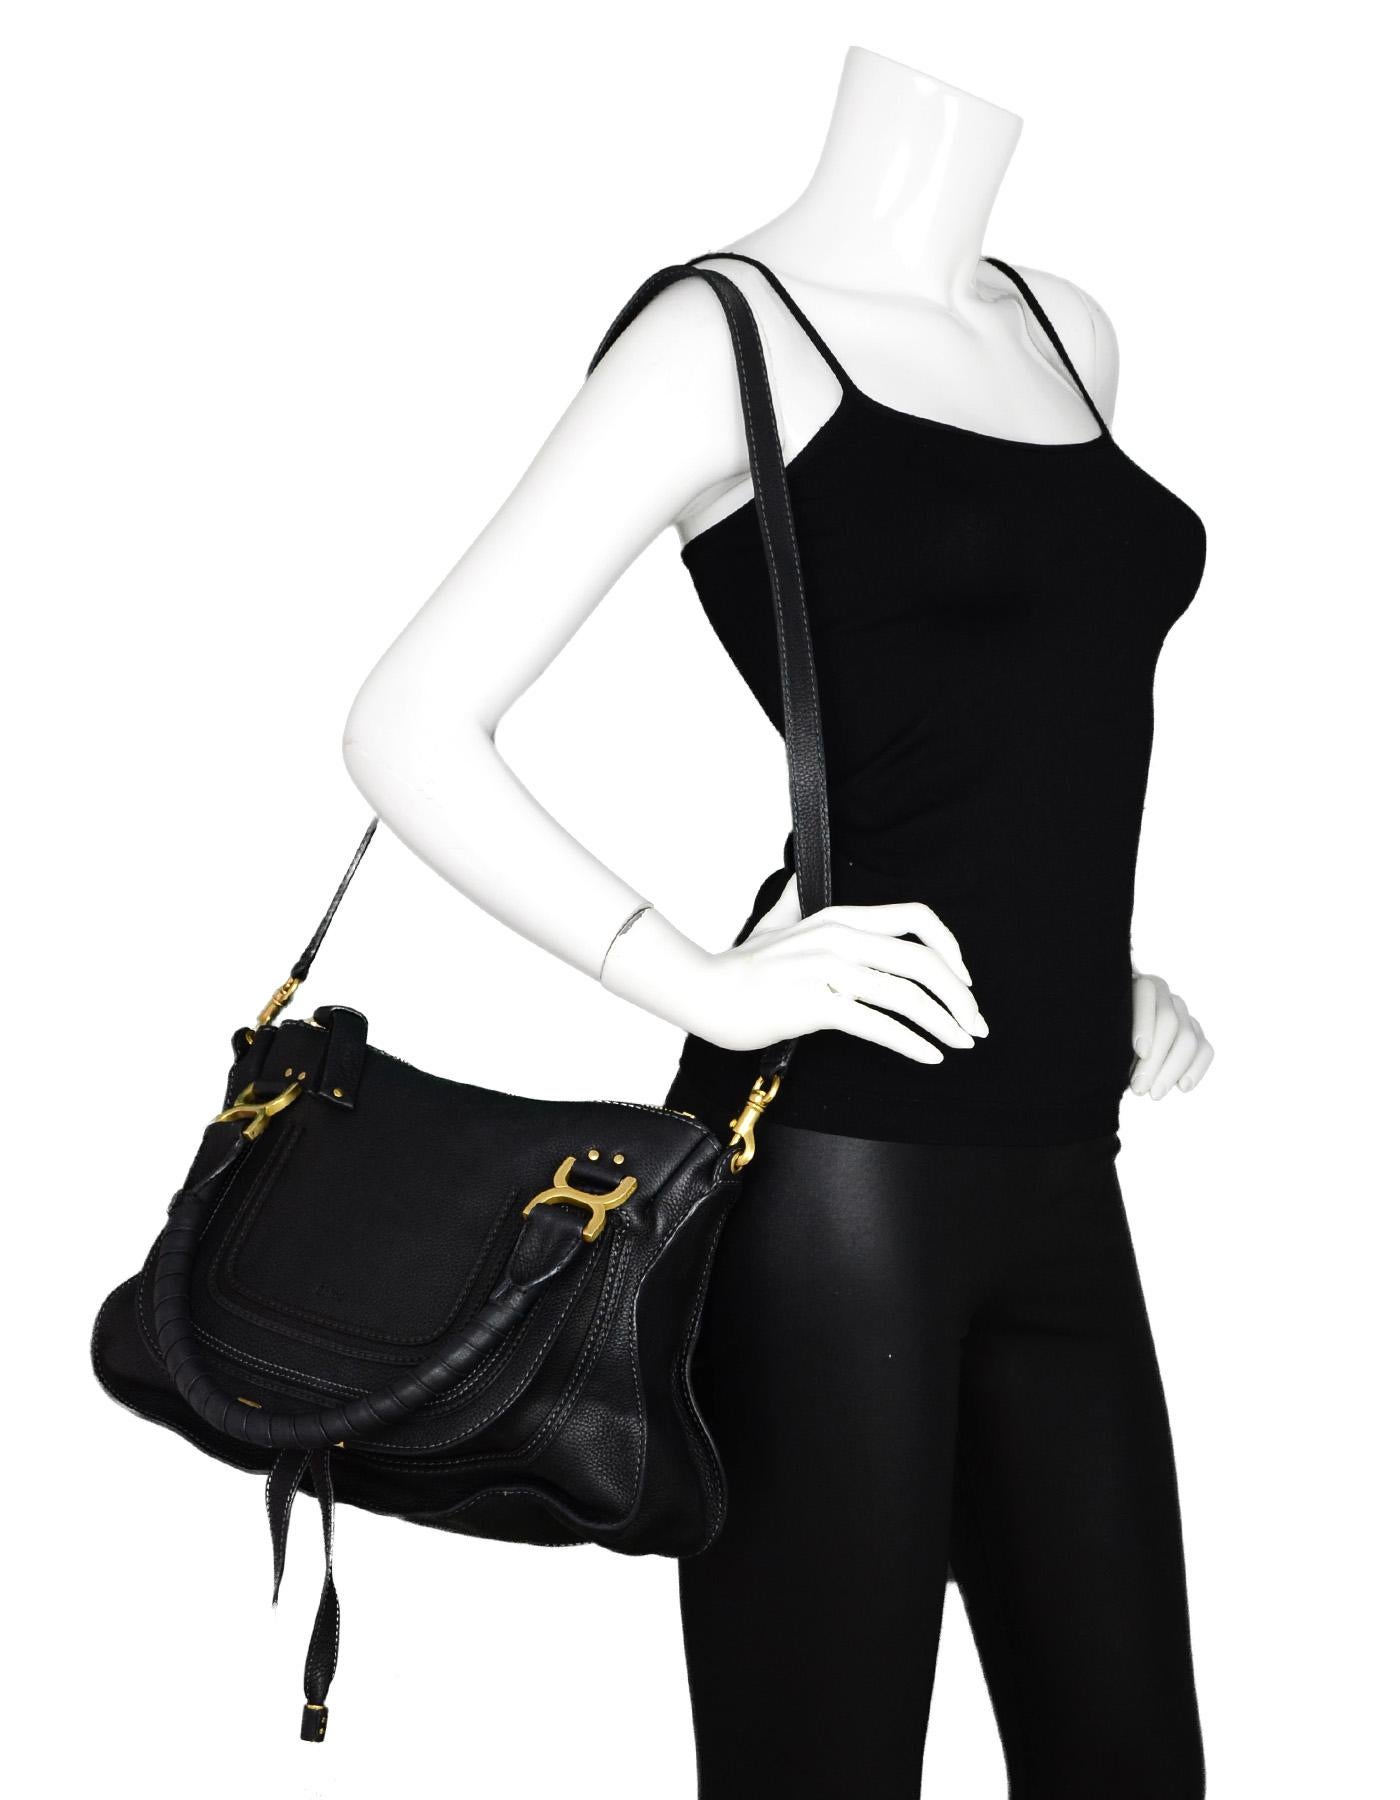 Chloe Black Leather Medium Marcie Satchel Bag W/ Crossbody Strap

Made In: Italy
Color: Black
Hardware: Goldtone
Materials: Leather, goldtone metal 
Lining: Taupe textile
Closure/Opening: Zip top
Exterior Pockets: One open pocket under front flap